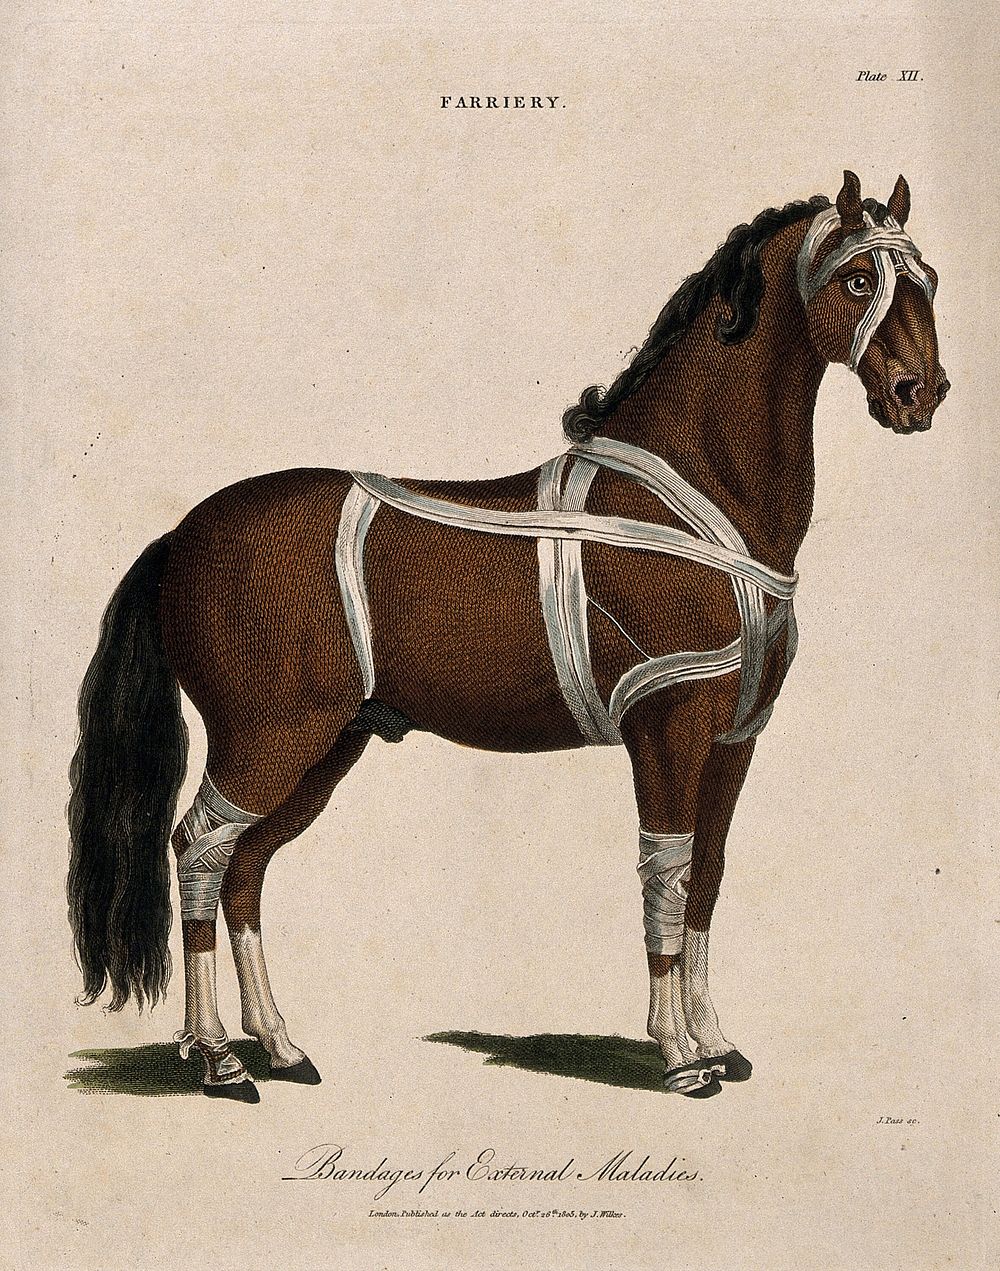 A horse, shown with bandaged head, body and legs. Coloured engraving by J. Pass after Harguinier, 1805.